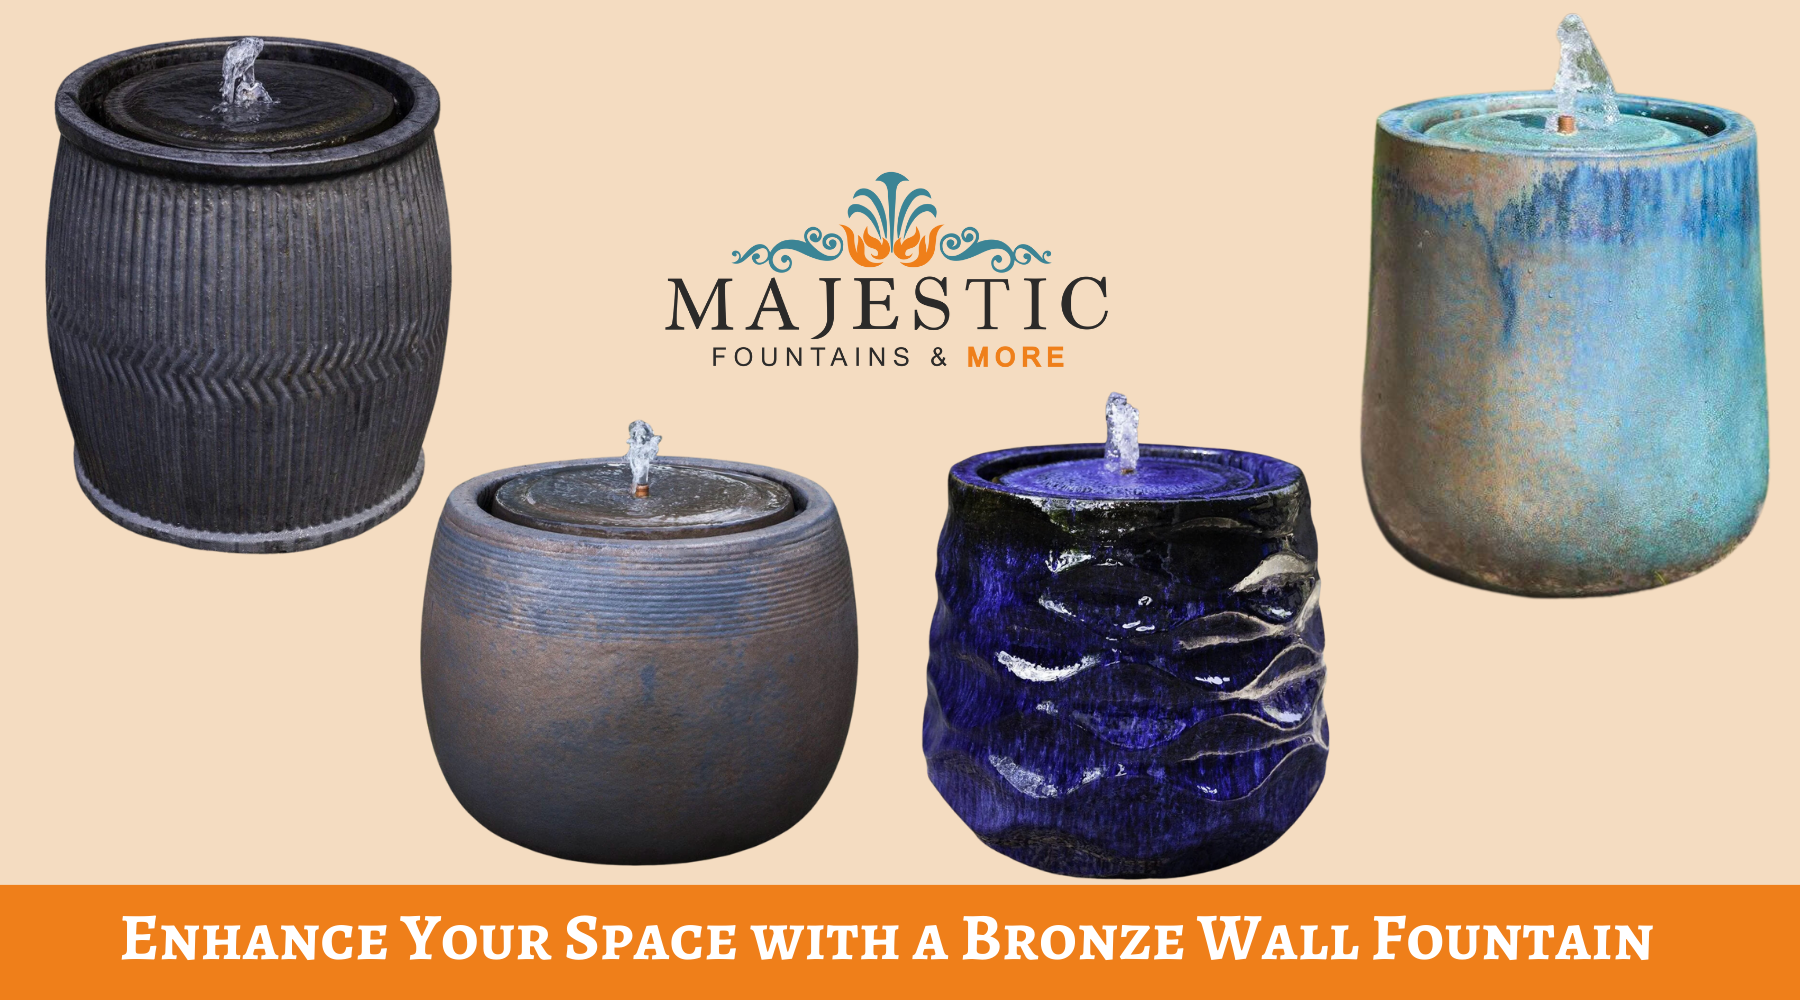 Discover The Art Of Outdoor Design With Glazed Terra Cotta Vase Fountains